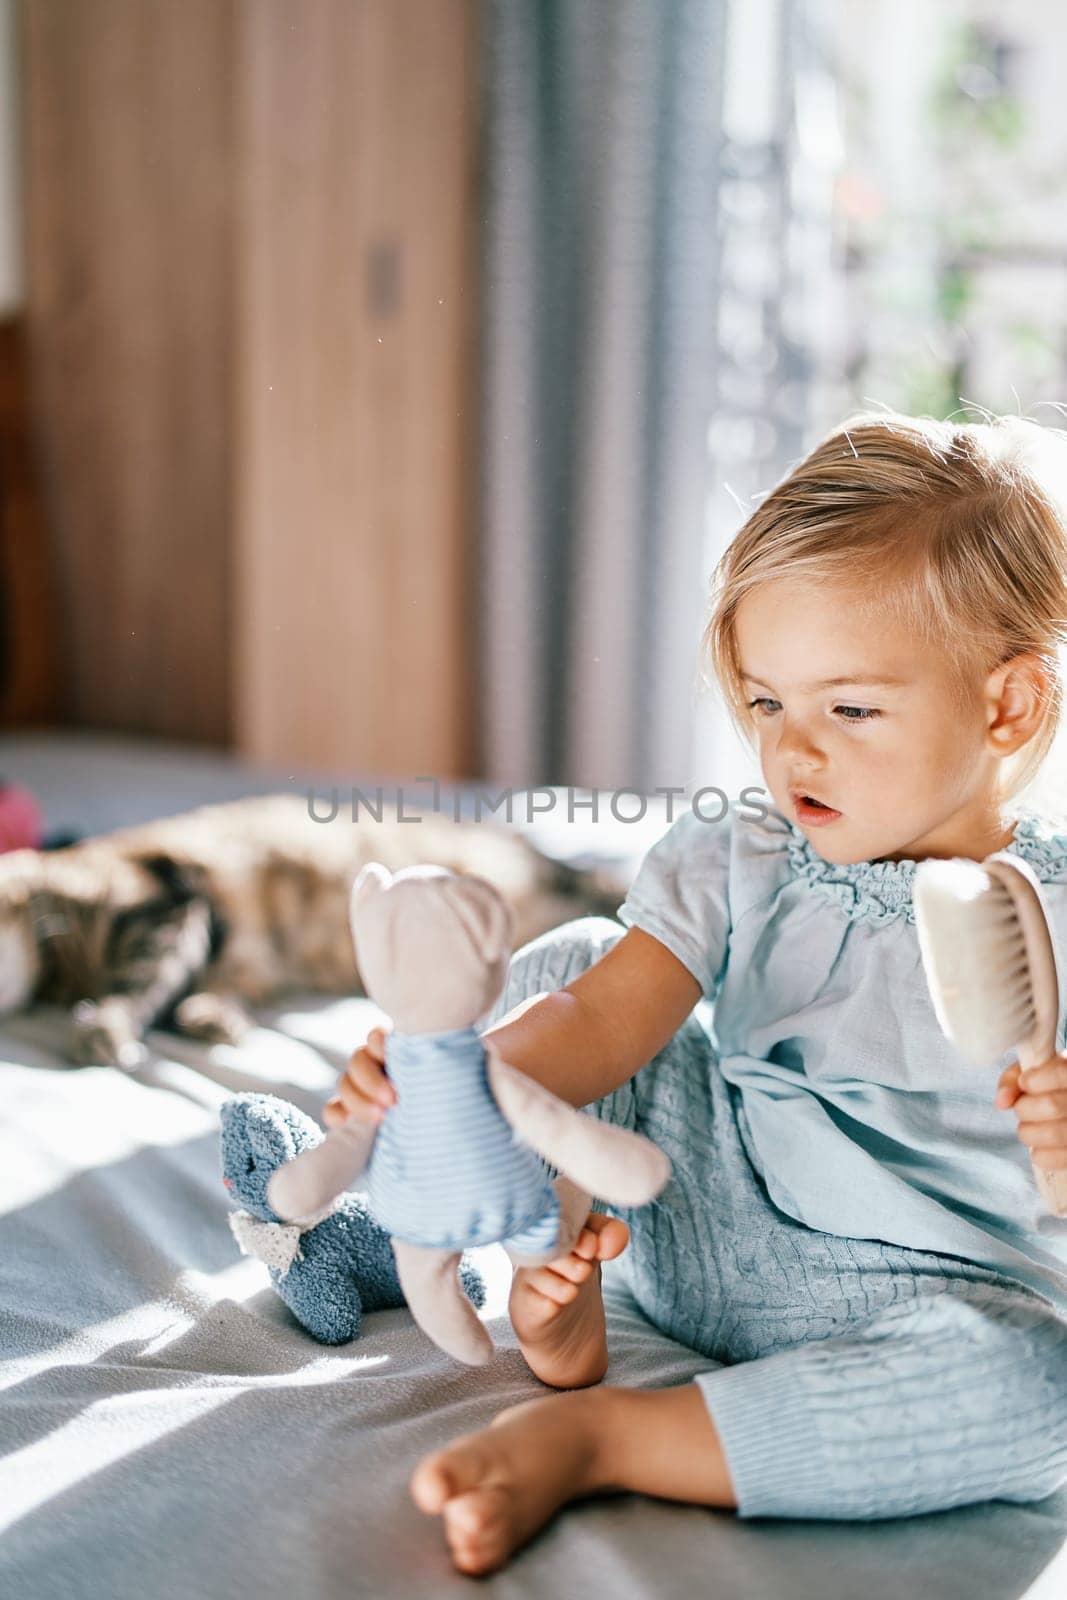 Little girl holds a teddy bear in her outstretched hand with a comb in her other hand while sitting on the bed. High quality photo